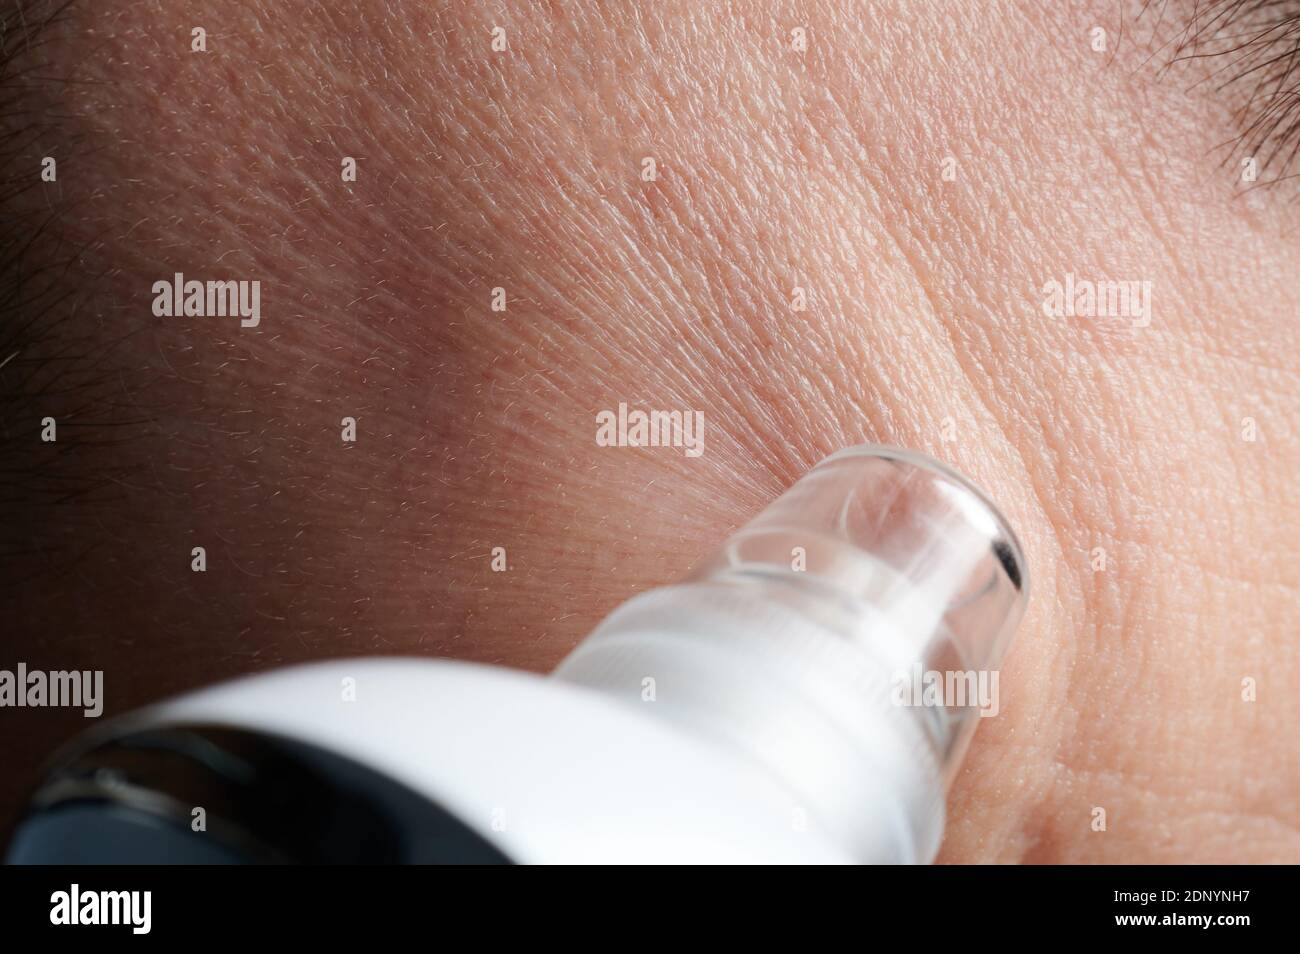 Cleaning skin  therapy  on forehead with suction tool macro close up view Stock Photo